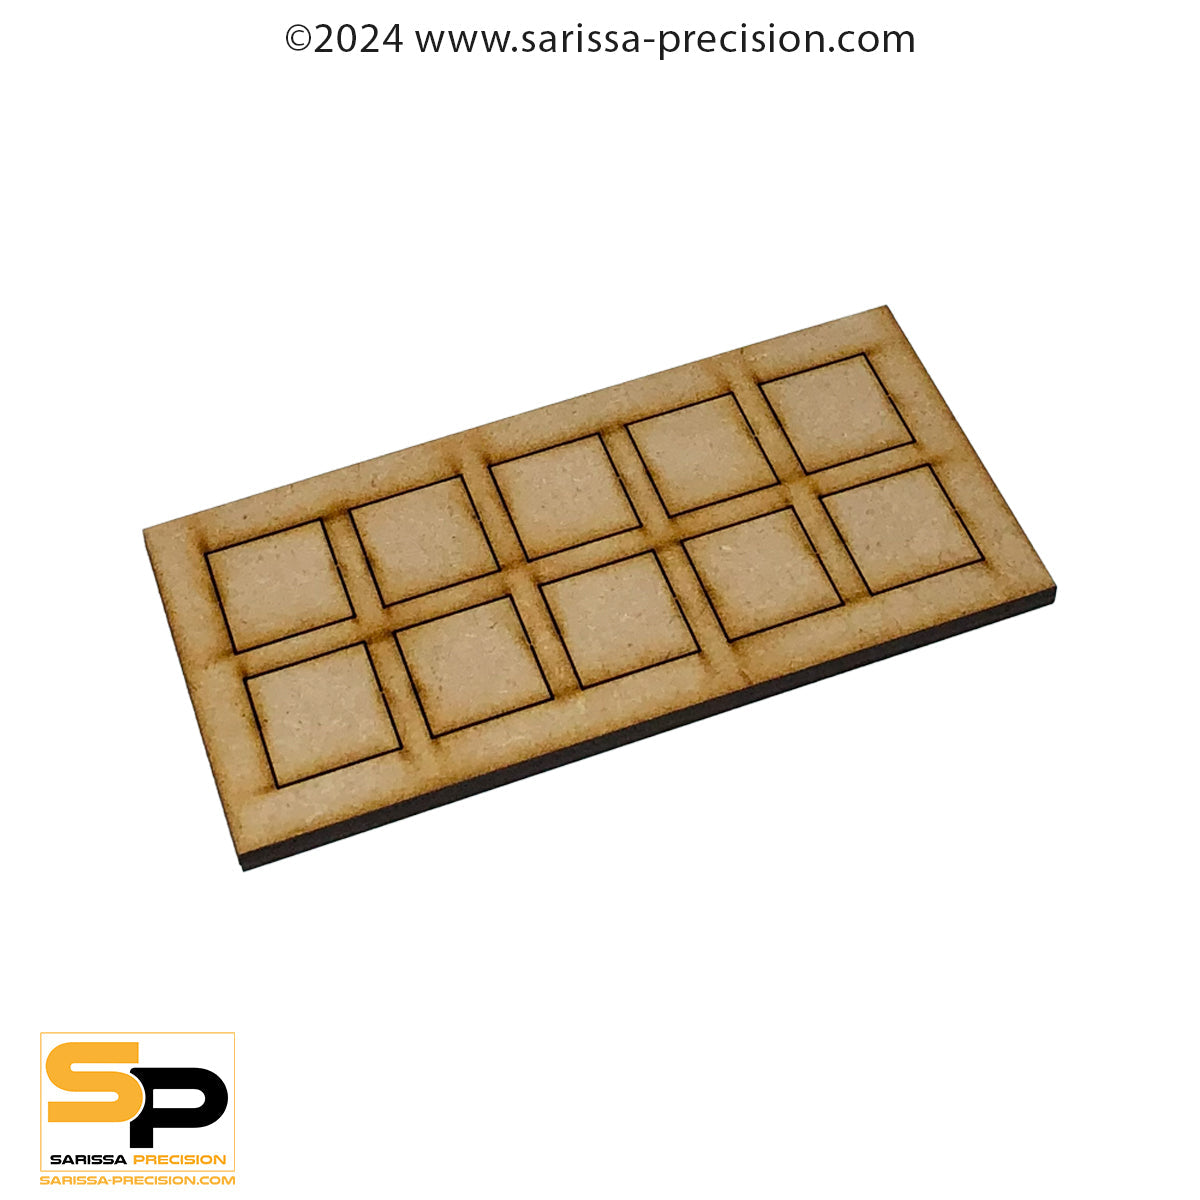 6x5 25x25mm Conversion Tray for 20x20mm bases